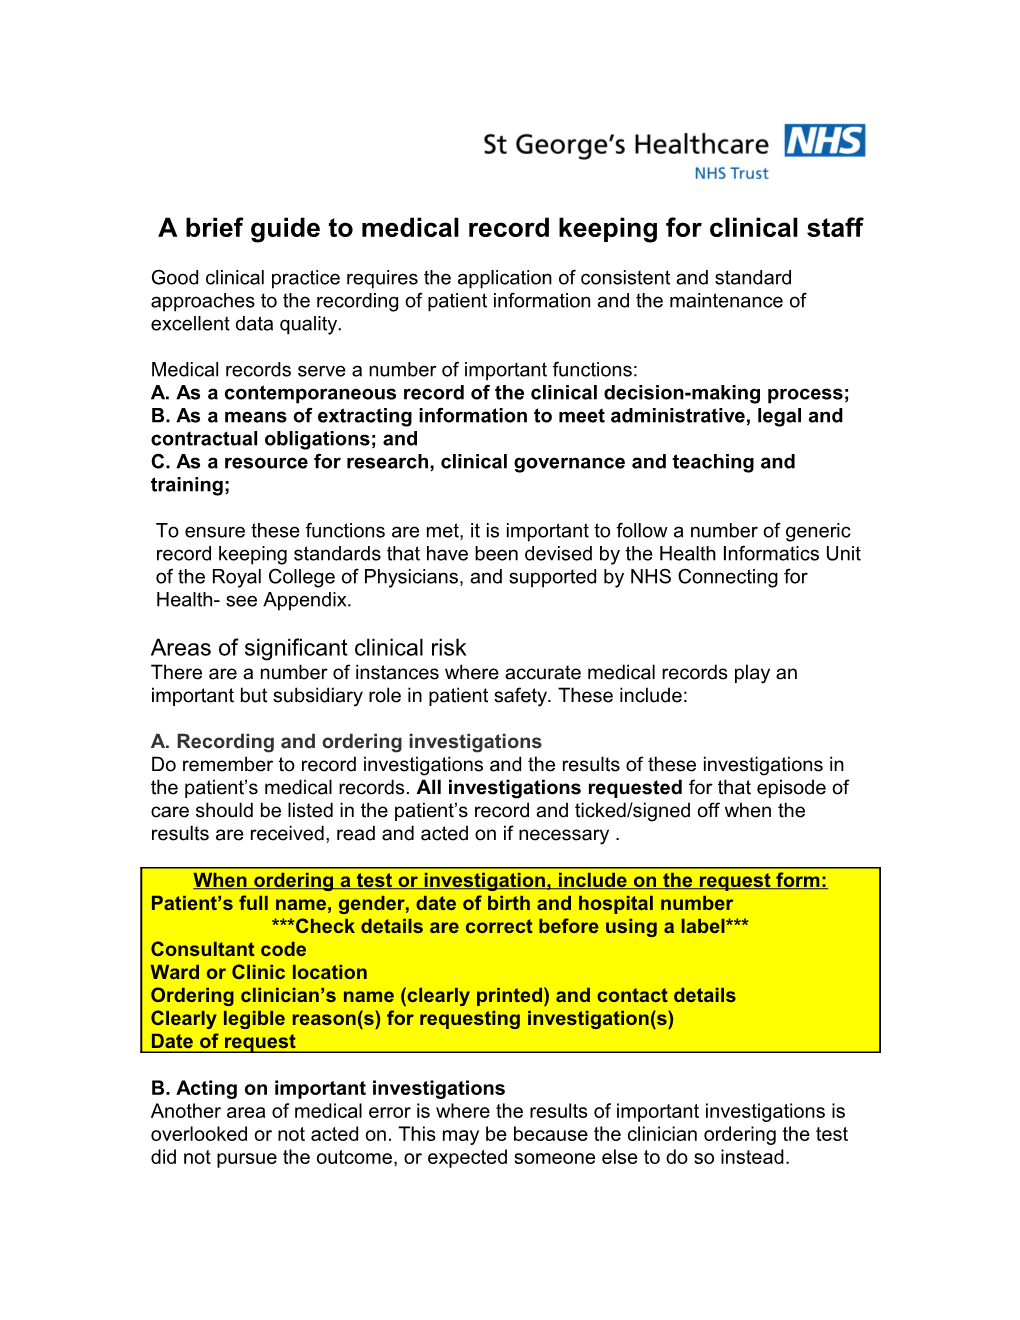 A Brief Guide to Medical Record Keeping for Clinical Staff